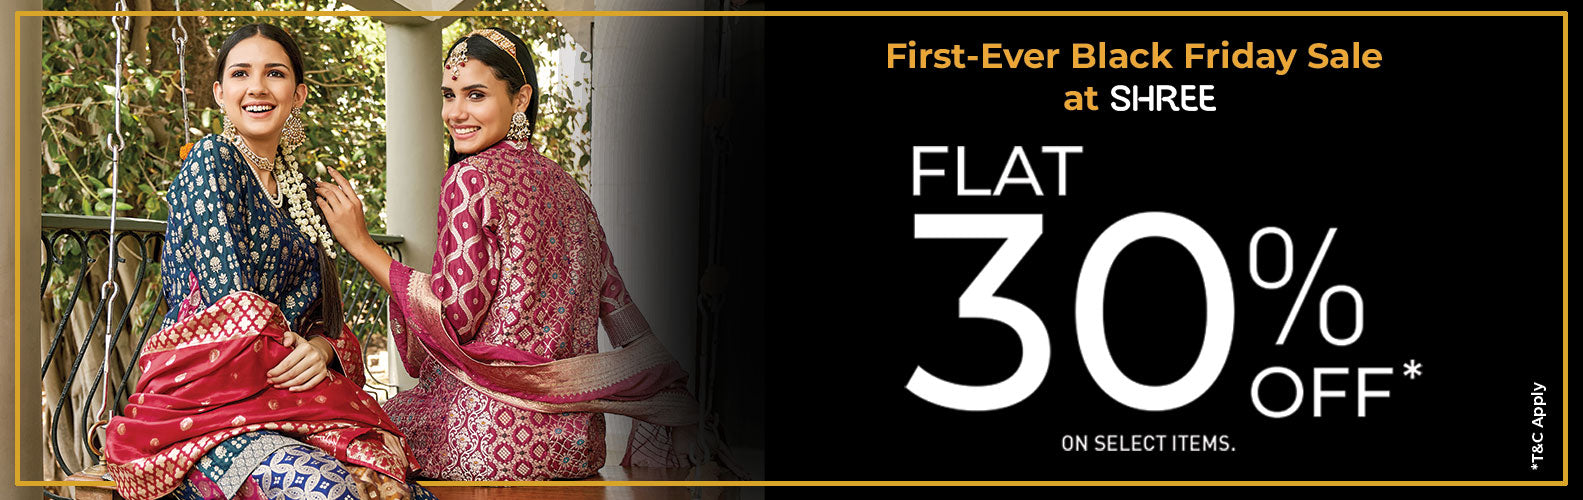 Flat 30% Off - First-Ever Black Friday Sale At Shree